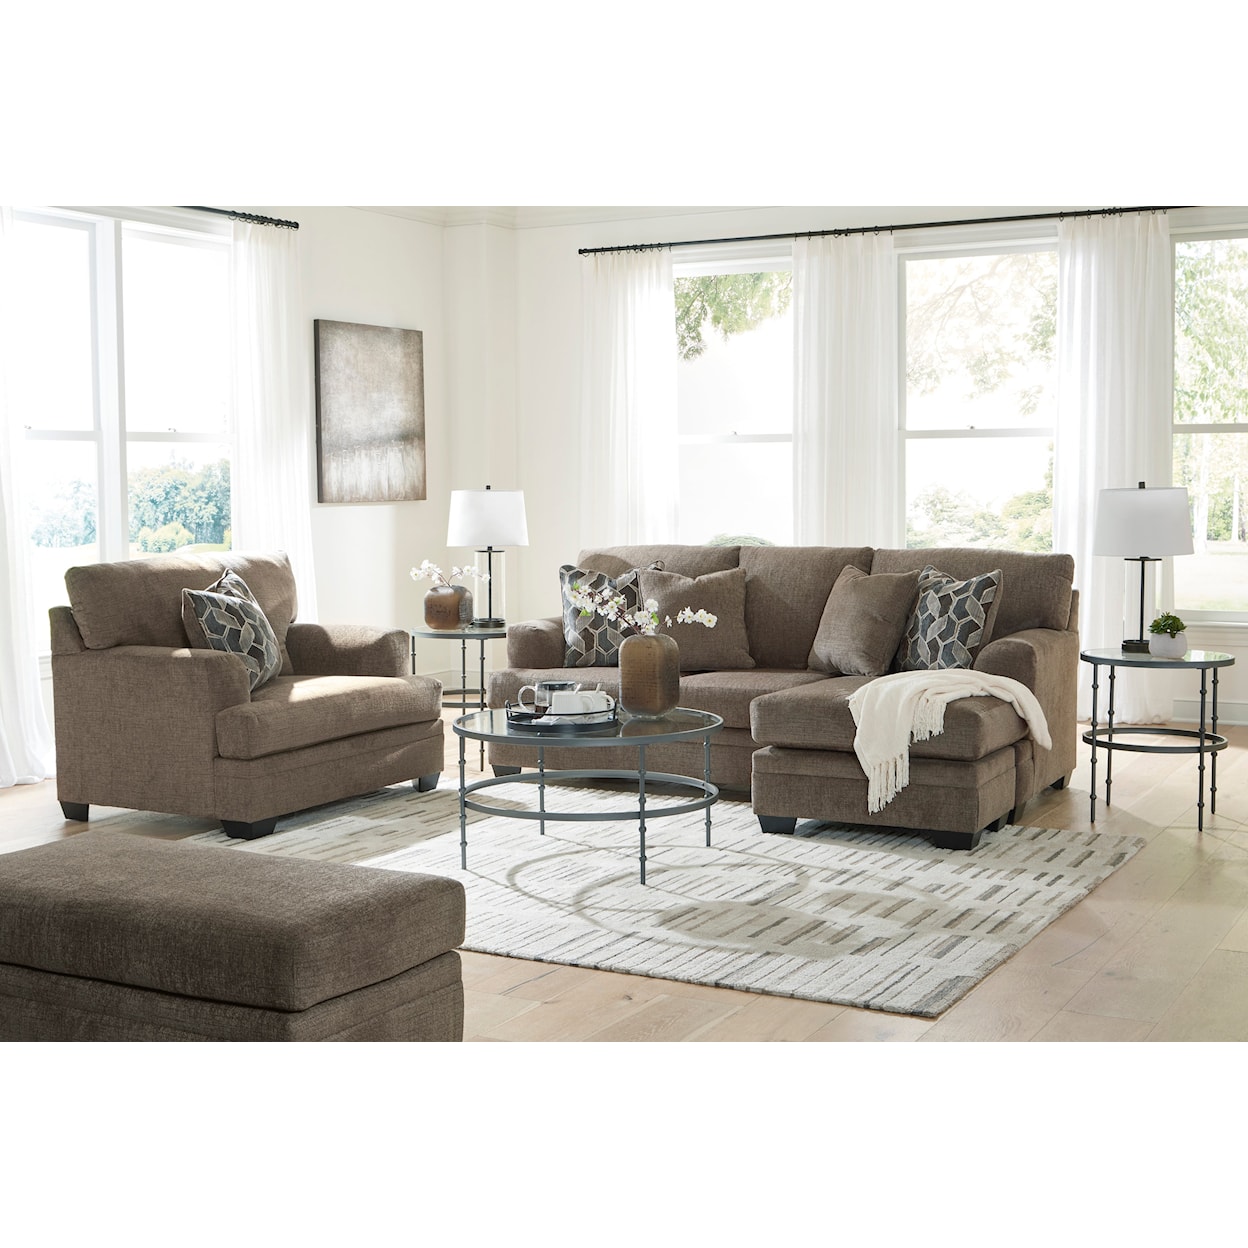 Ashley Furniture Signature Design Stonemeade Sofa Chaise, Oversized Chair and Ottoman